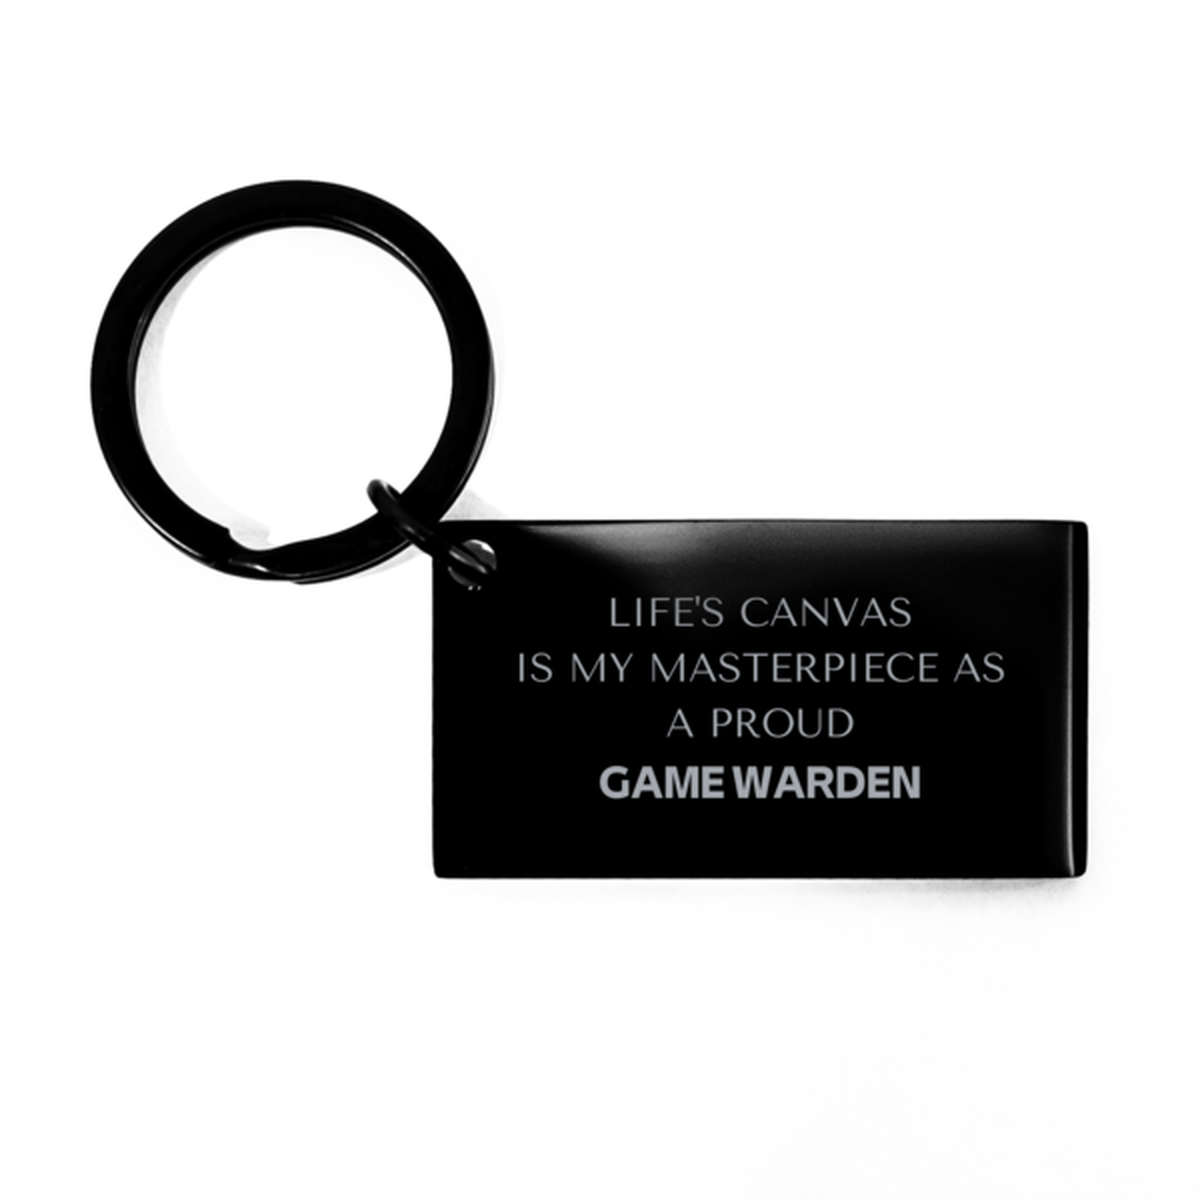 Proud Game Warden Gifts, Life's canvas is my masterpiece, Epic Birthday Christmas Unique Keychain For Game Warden, Coworkers, Men, Women, Friends